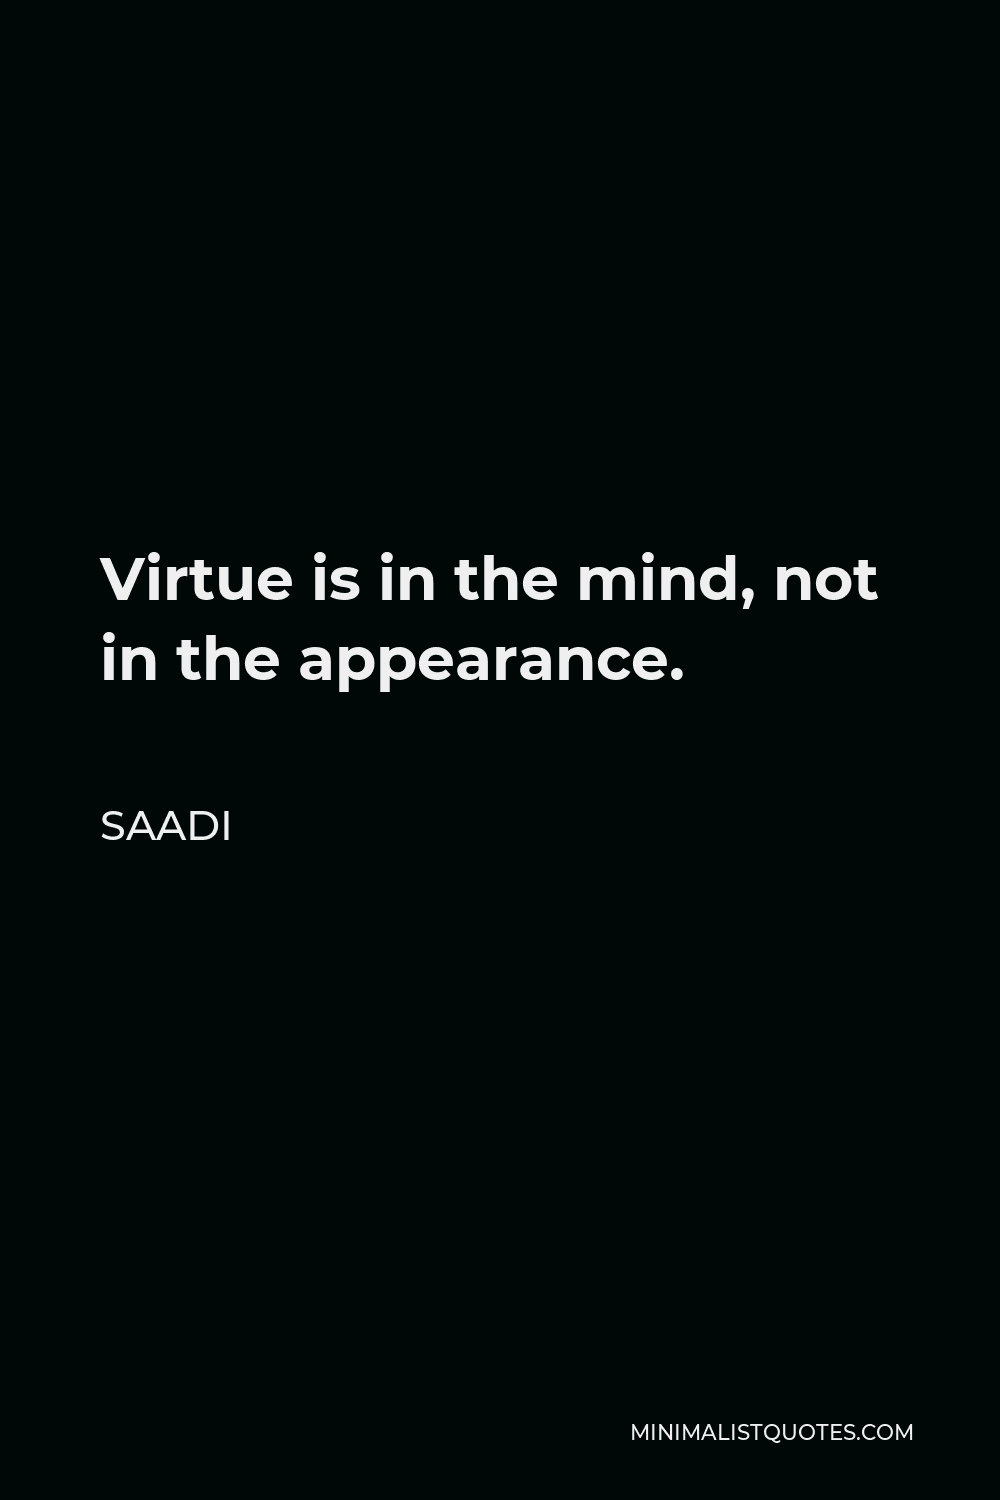 Saadi Quote - Virtue is in the mind, not in the appearance.